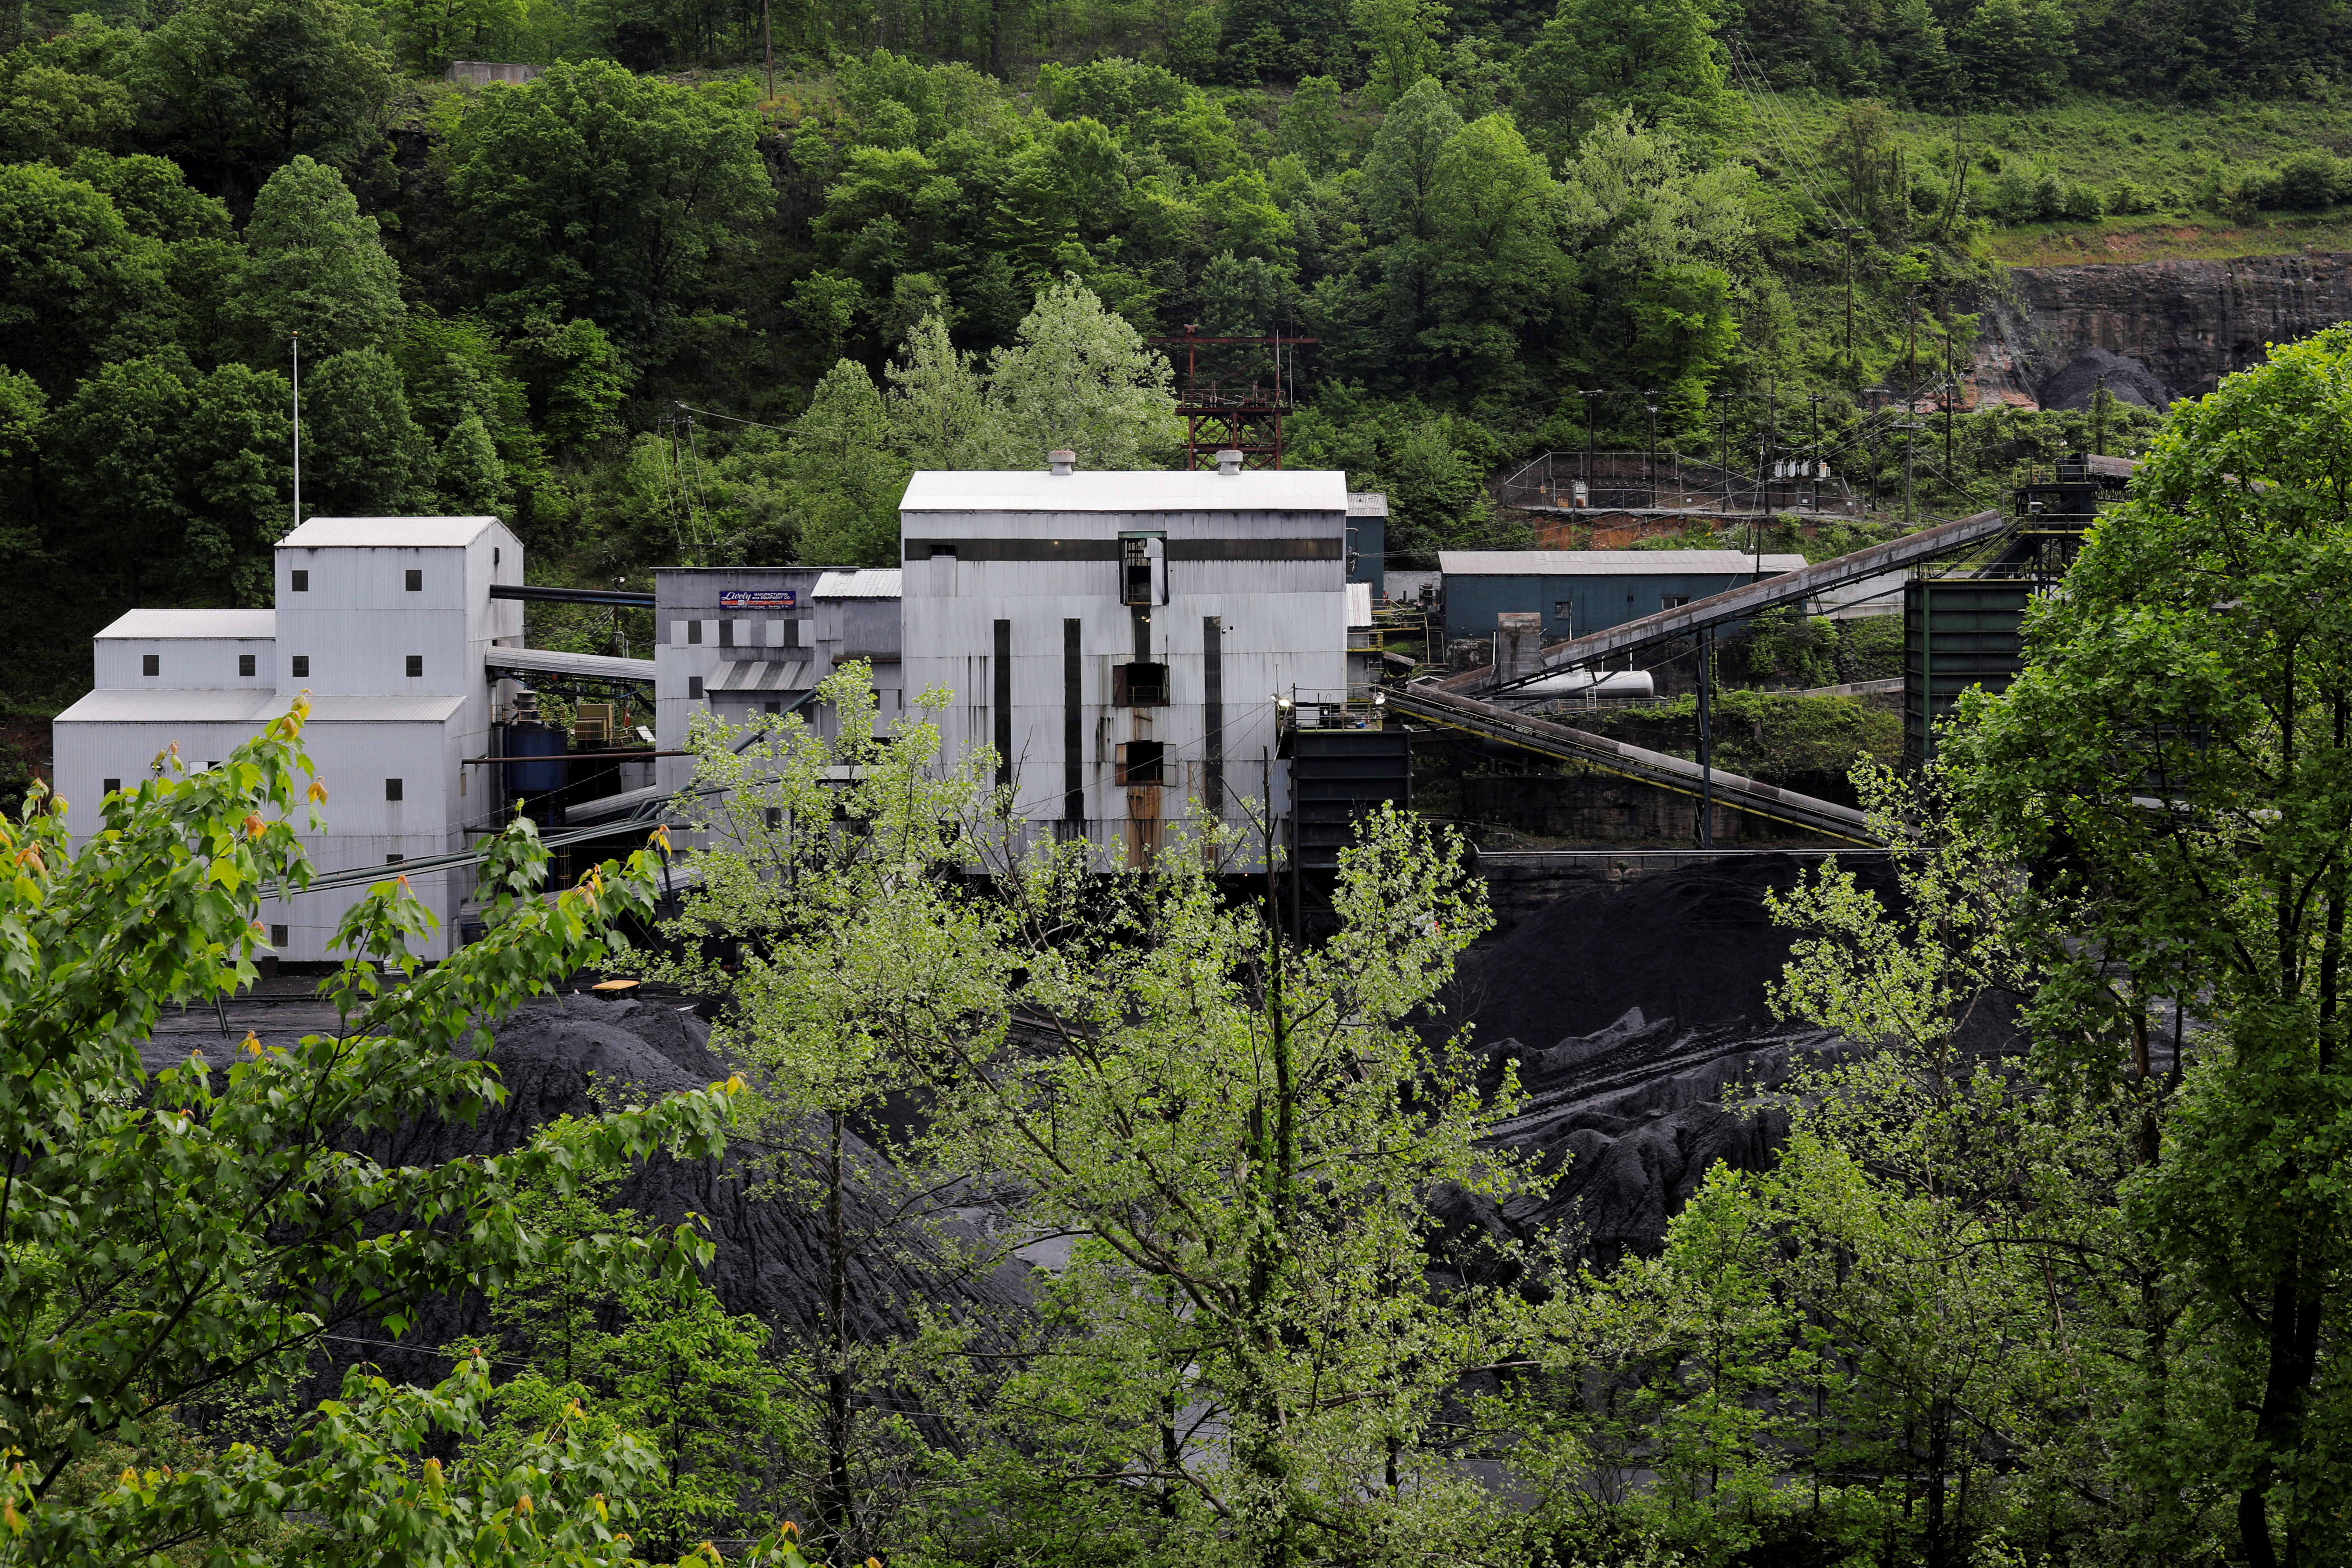 A coal mine sits among the trees in Welch, West Virginia